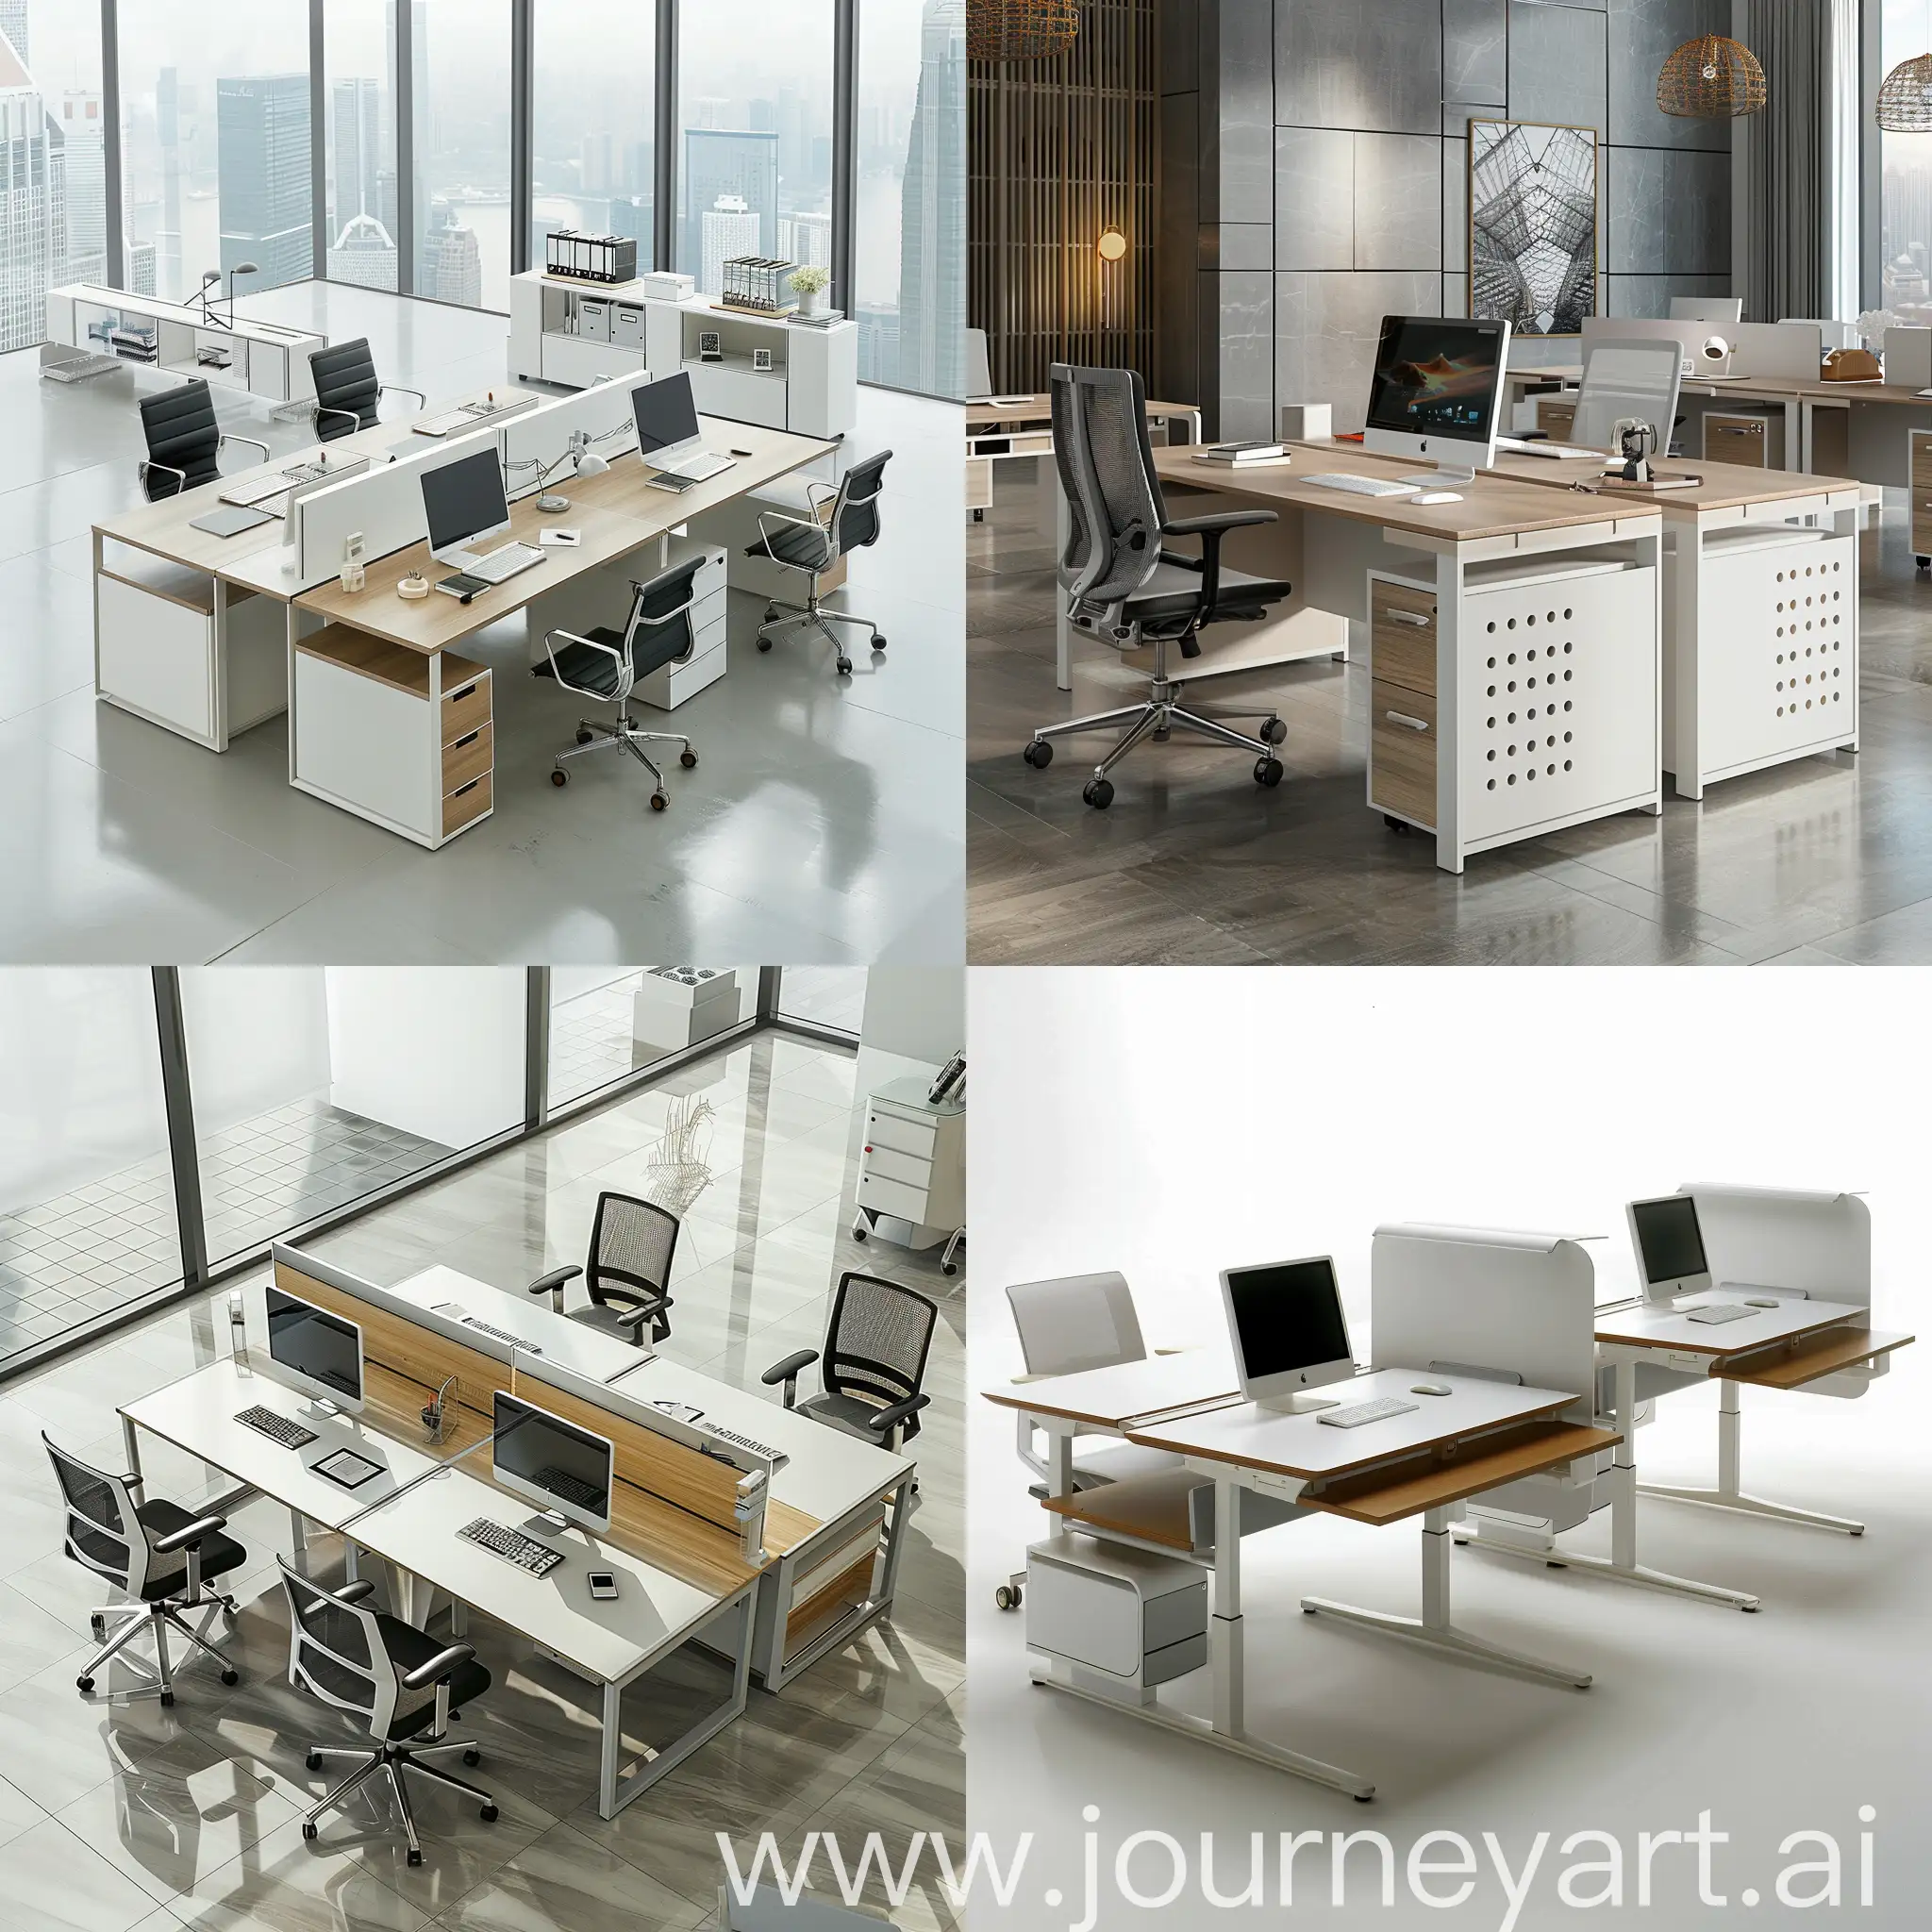 Minimalist-Administrative-Office-with-Metal-and-Wood-Workstation-Desks